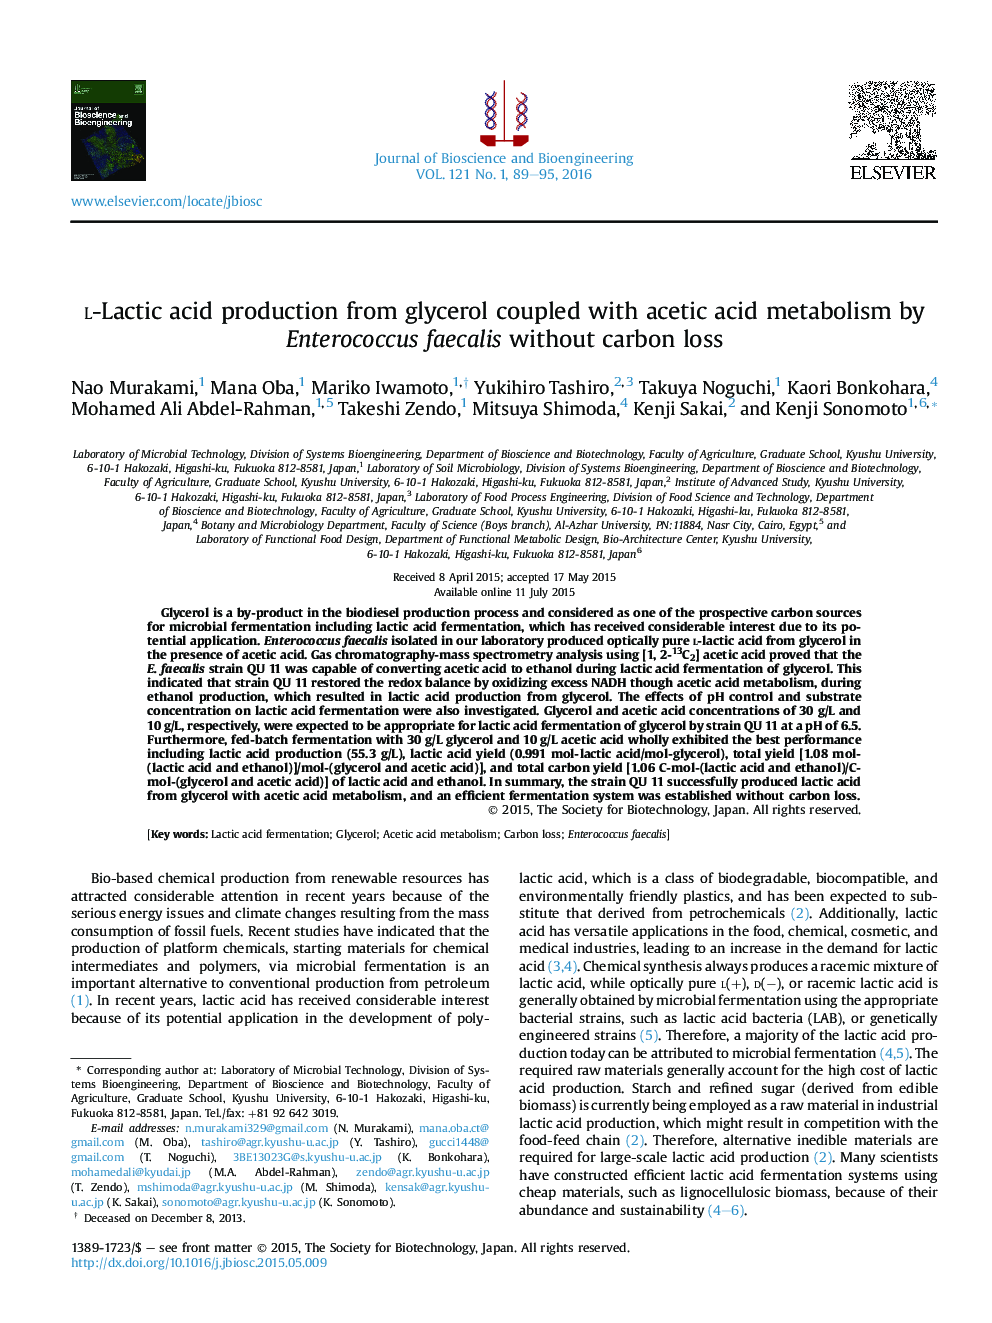 l-Lactic acid production from glycerol coupled with acetic acid metabolism by Enterococcus faecalis without carbon loss